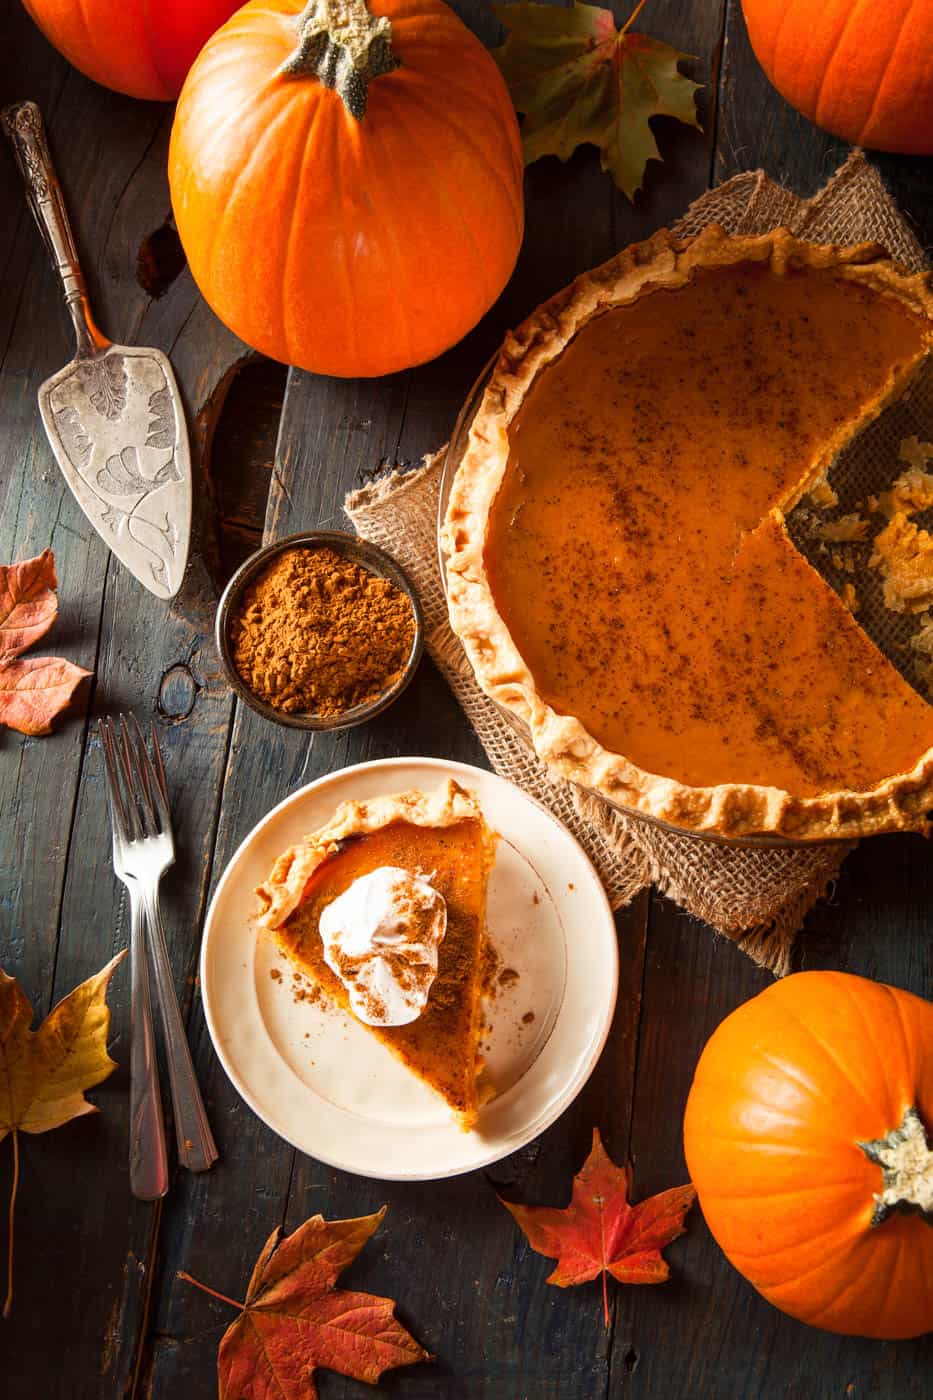 healthy pumpkin pie, low calorie, gluten free option - slice of pumpkin pie cut and served on a white plate, top view